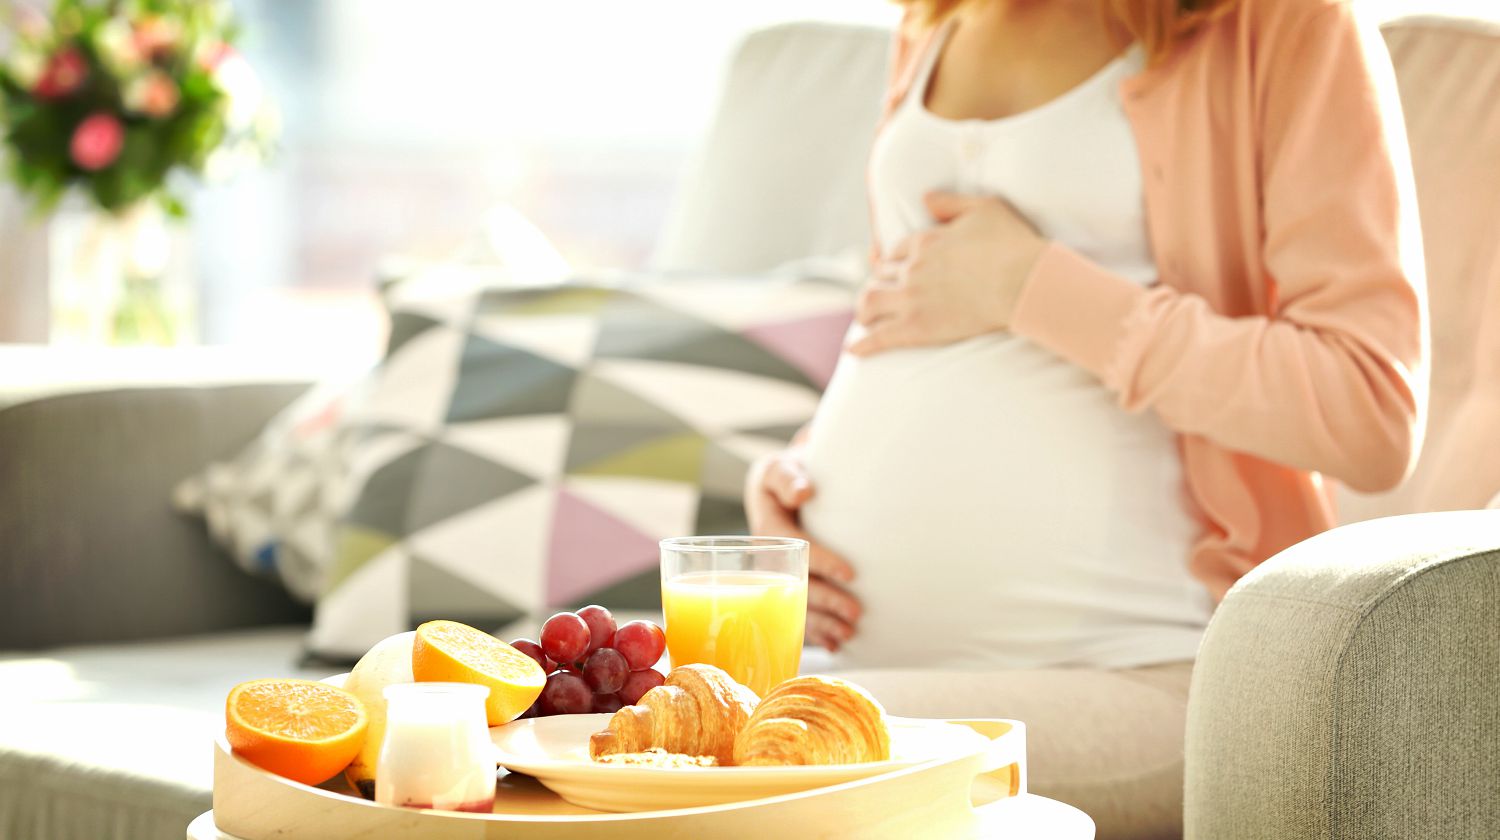 Fruit intake during pregnancy affects the cognitive function of children